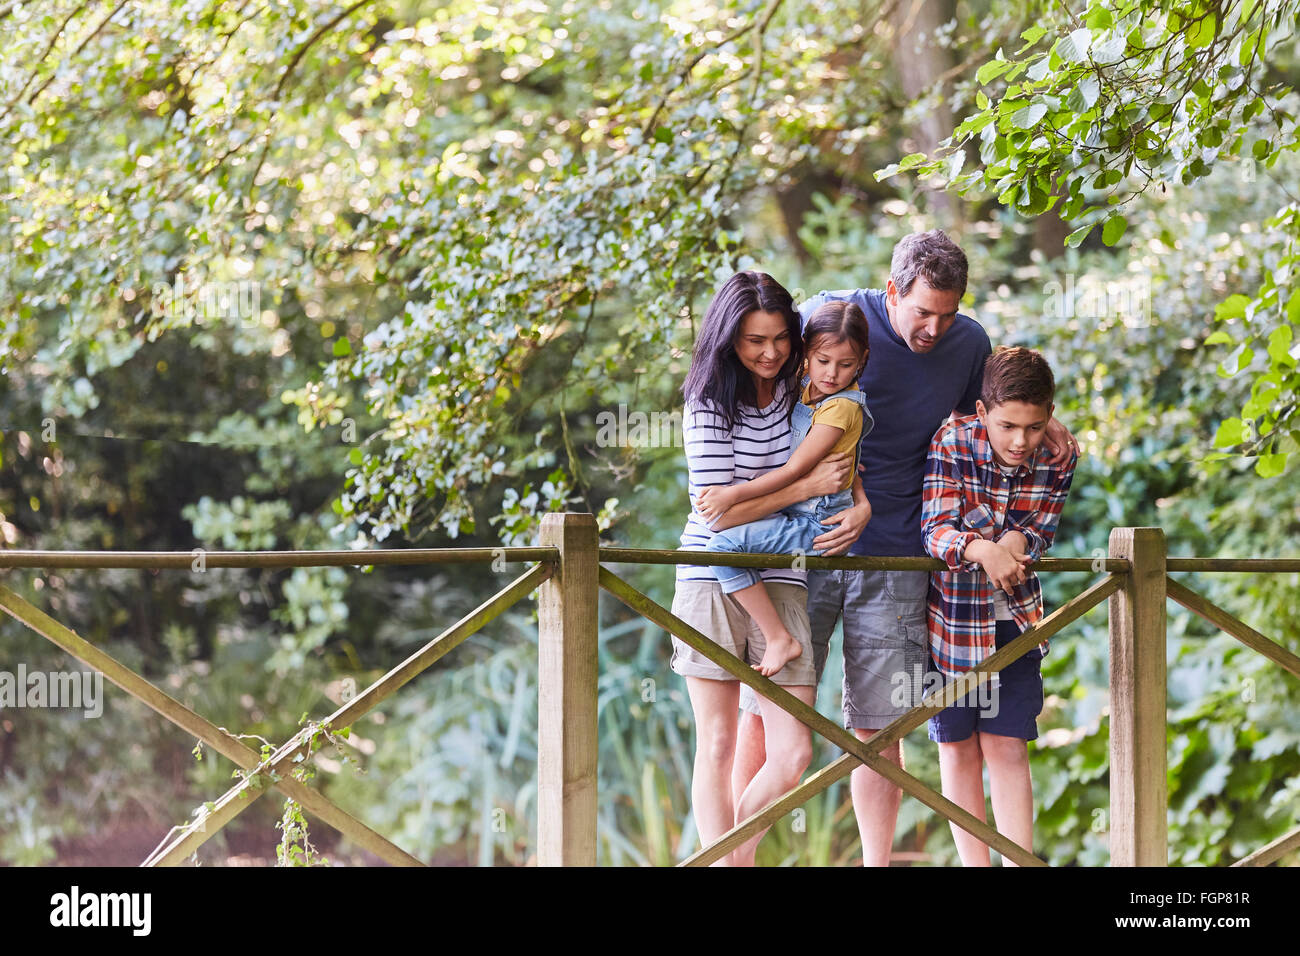 Family standing on footbridge in park with trees Stock Photo